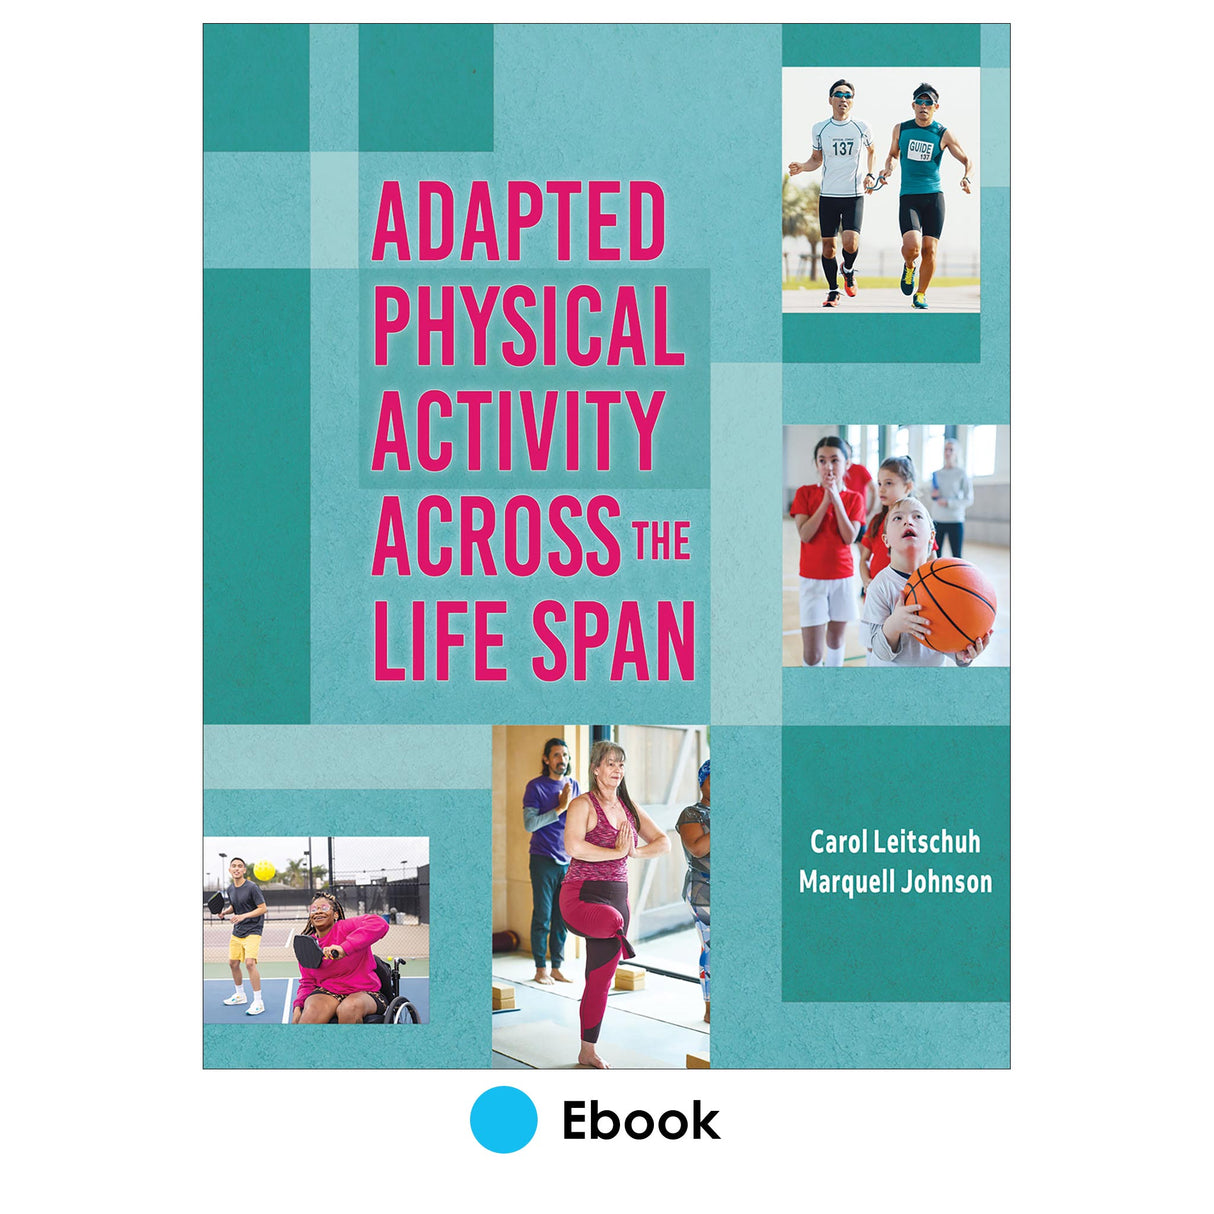 Adapted Physical Activity Across the Life Span epub